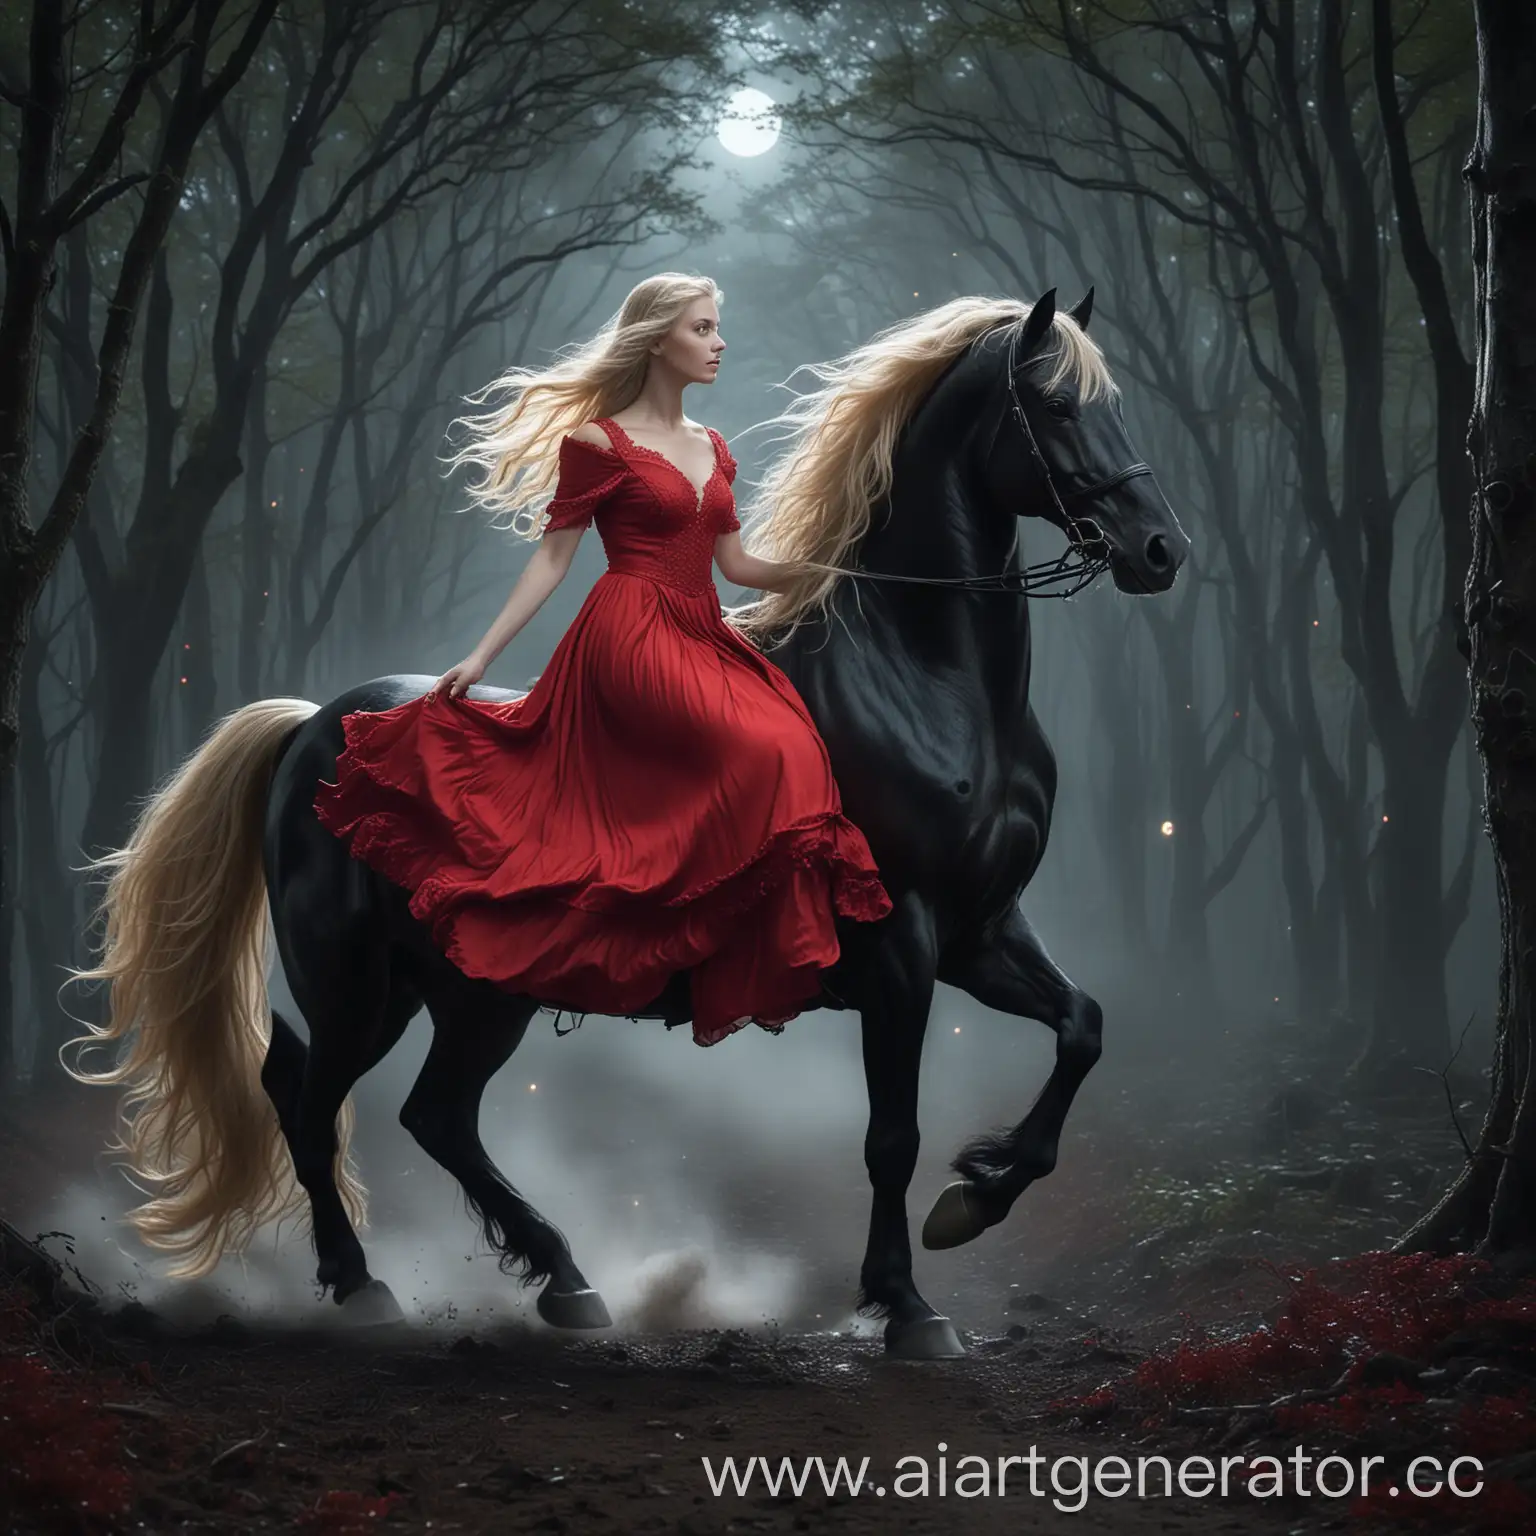 A charming woman with long blonde hair and sparkling blue eyes, dressed in a flowing red dress, rides a magnificent black stallion through a moonlit forest, the moonlight casts a magical glow on her and her steed.